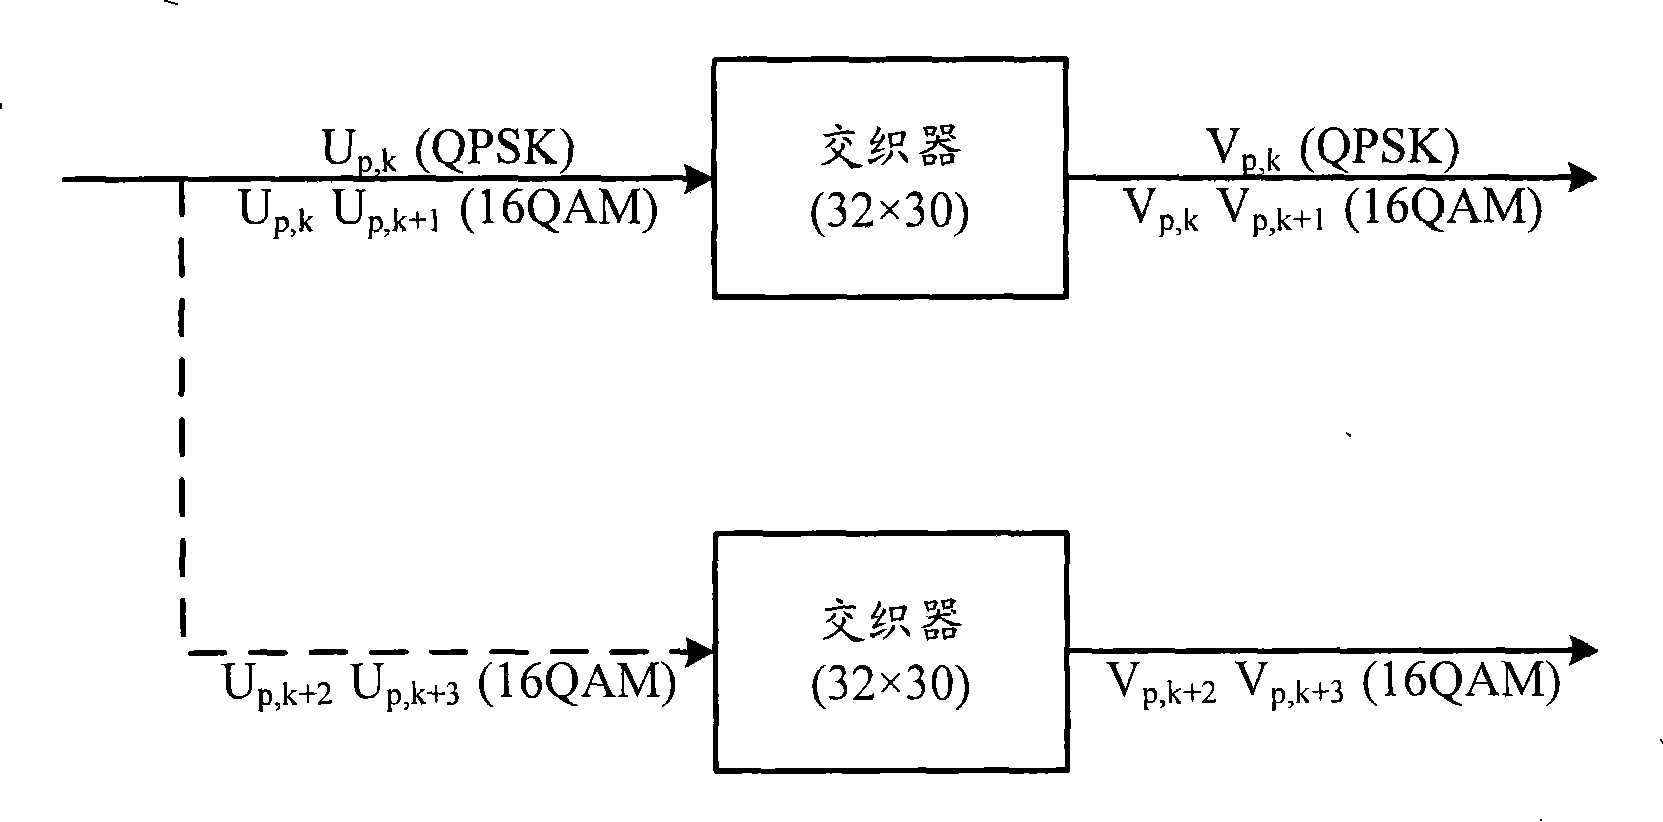 High-speed descending sharing channel coding multiplexing method and system